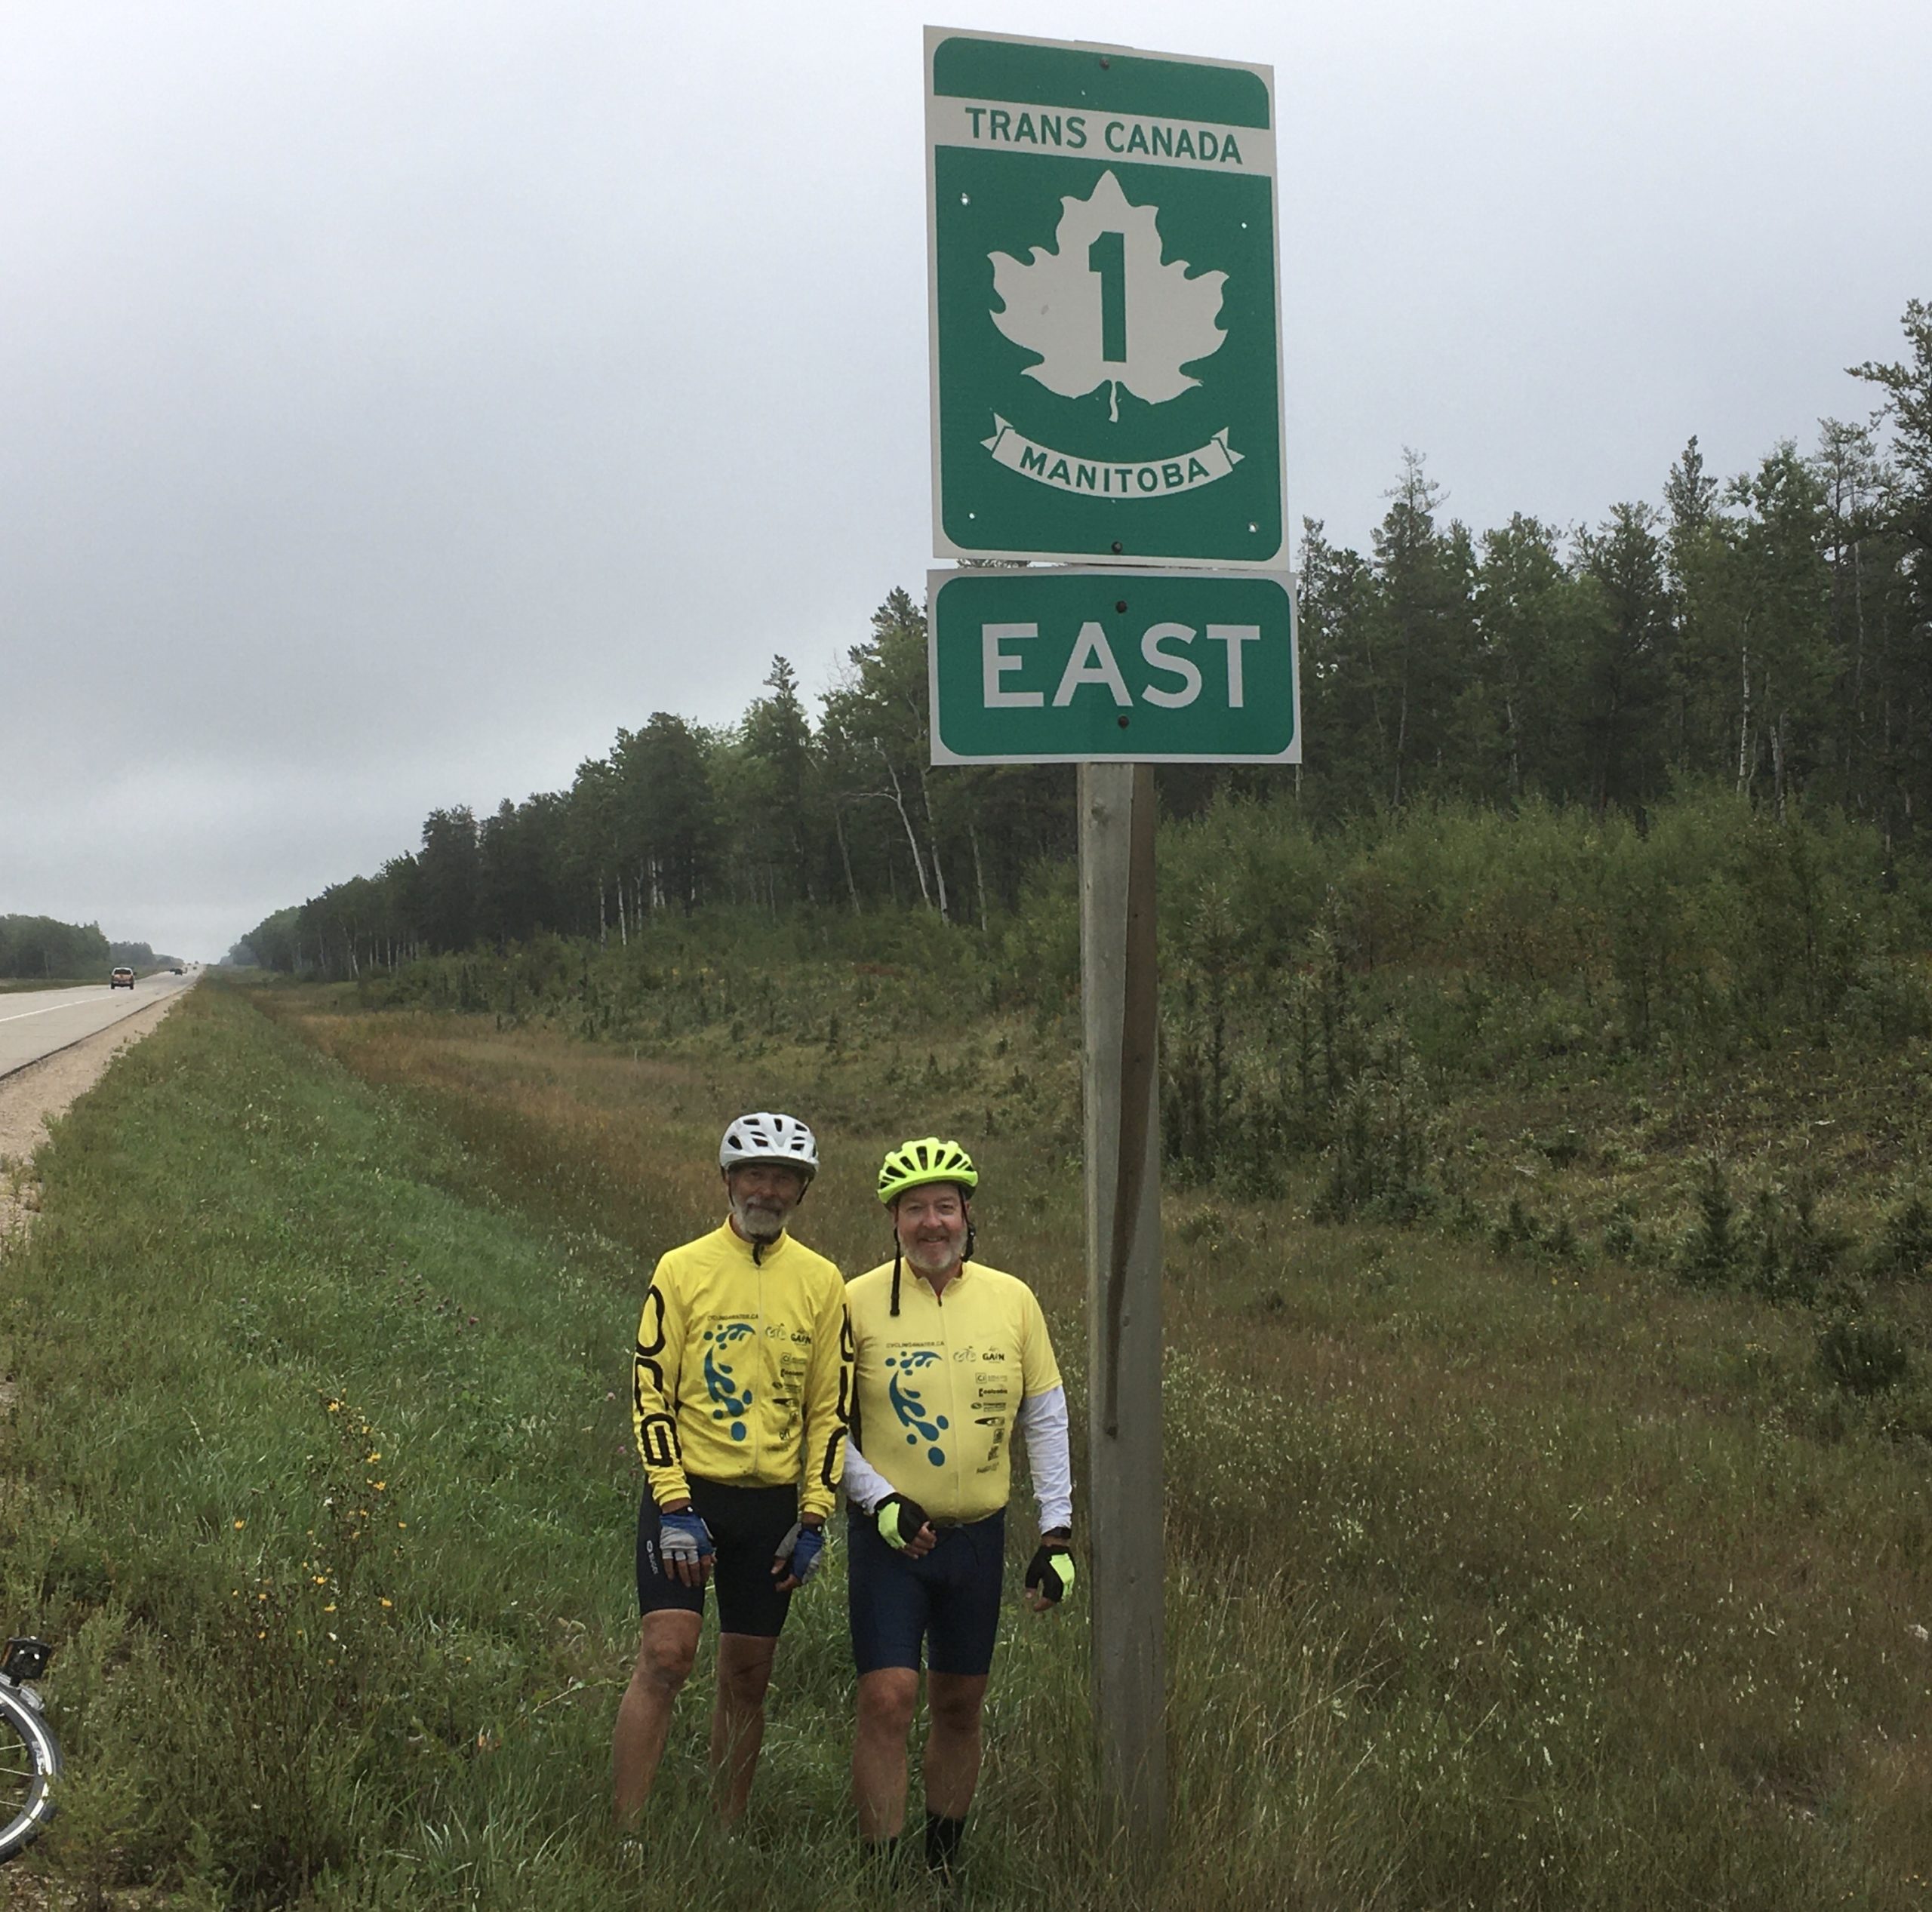 Day 36: Steinbach to Clearwater Bay – 163 KM